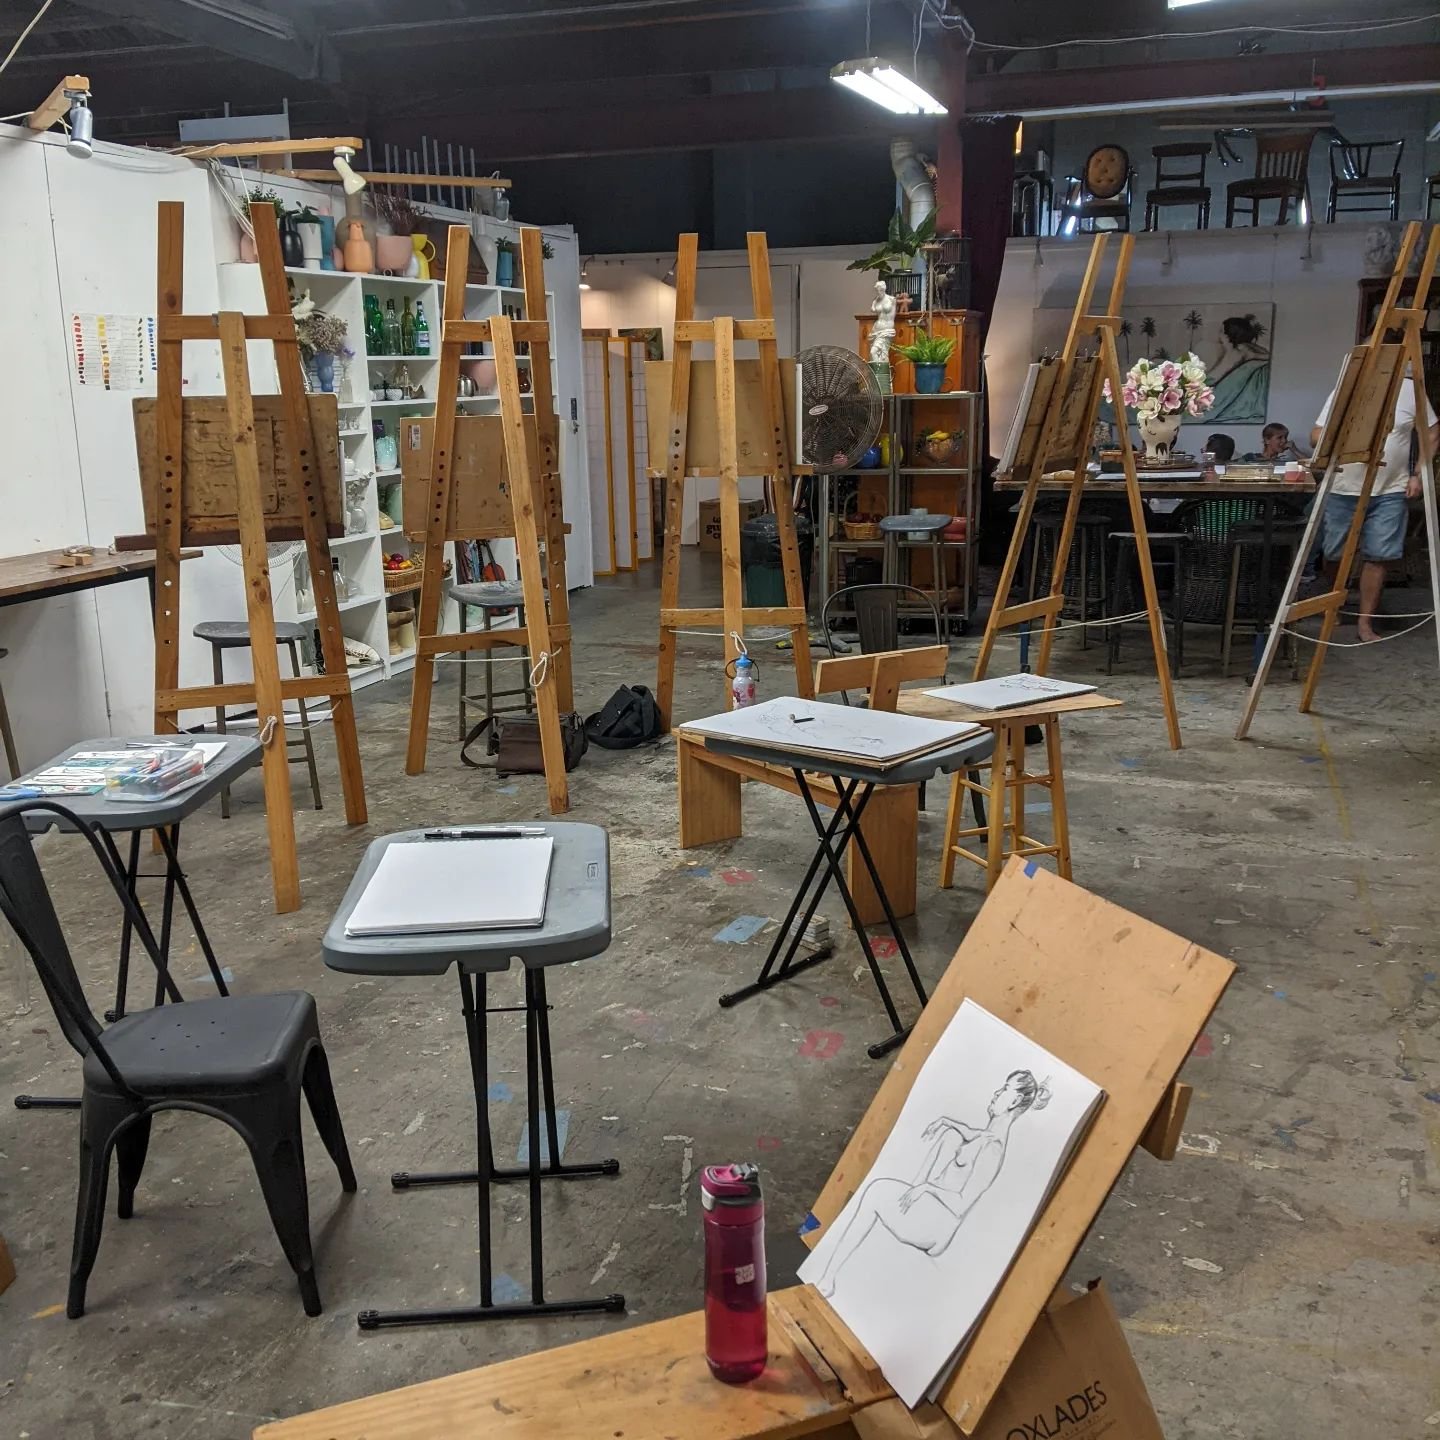 Our beloved Life Drawing Session with lovely model Sharon is this Wednesday 1st May. 🗓️

➡️ General admission starts at 7pm (until 9:30pm).
➡️ Tutoring with Wayne Van Eyk ( @waynevaneykart ) starts at 6:30pm.
➡️ Please bring your sketchbooks + advan